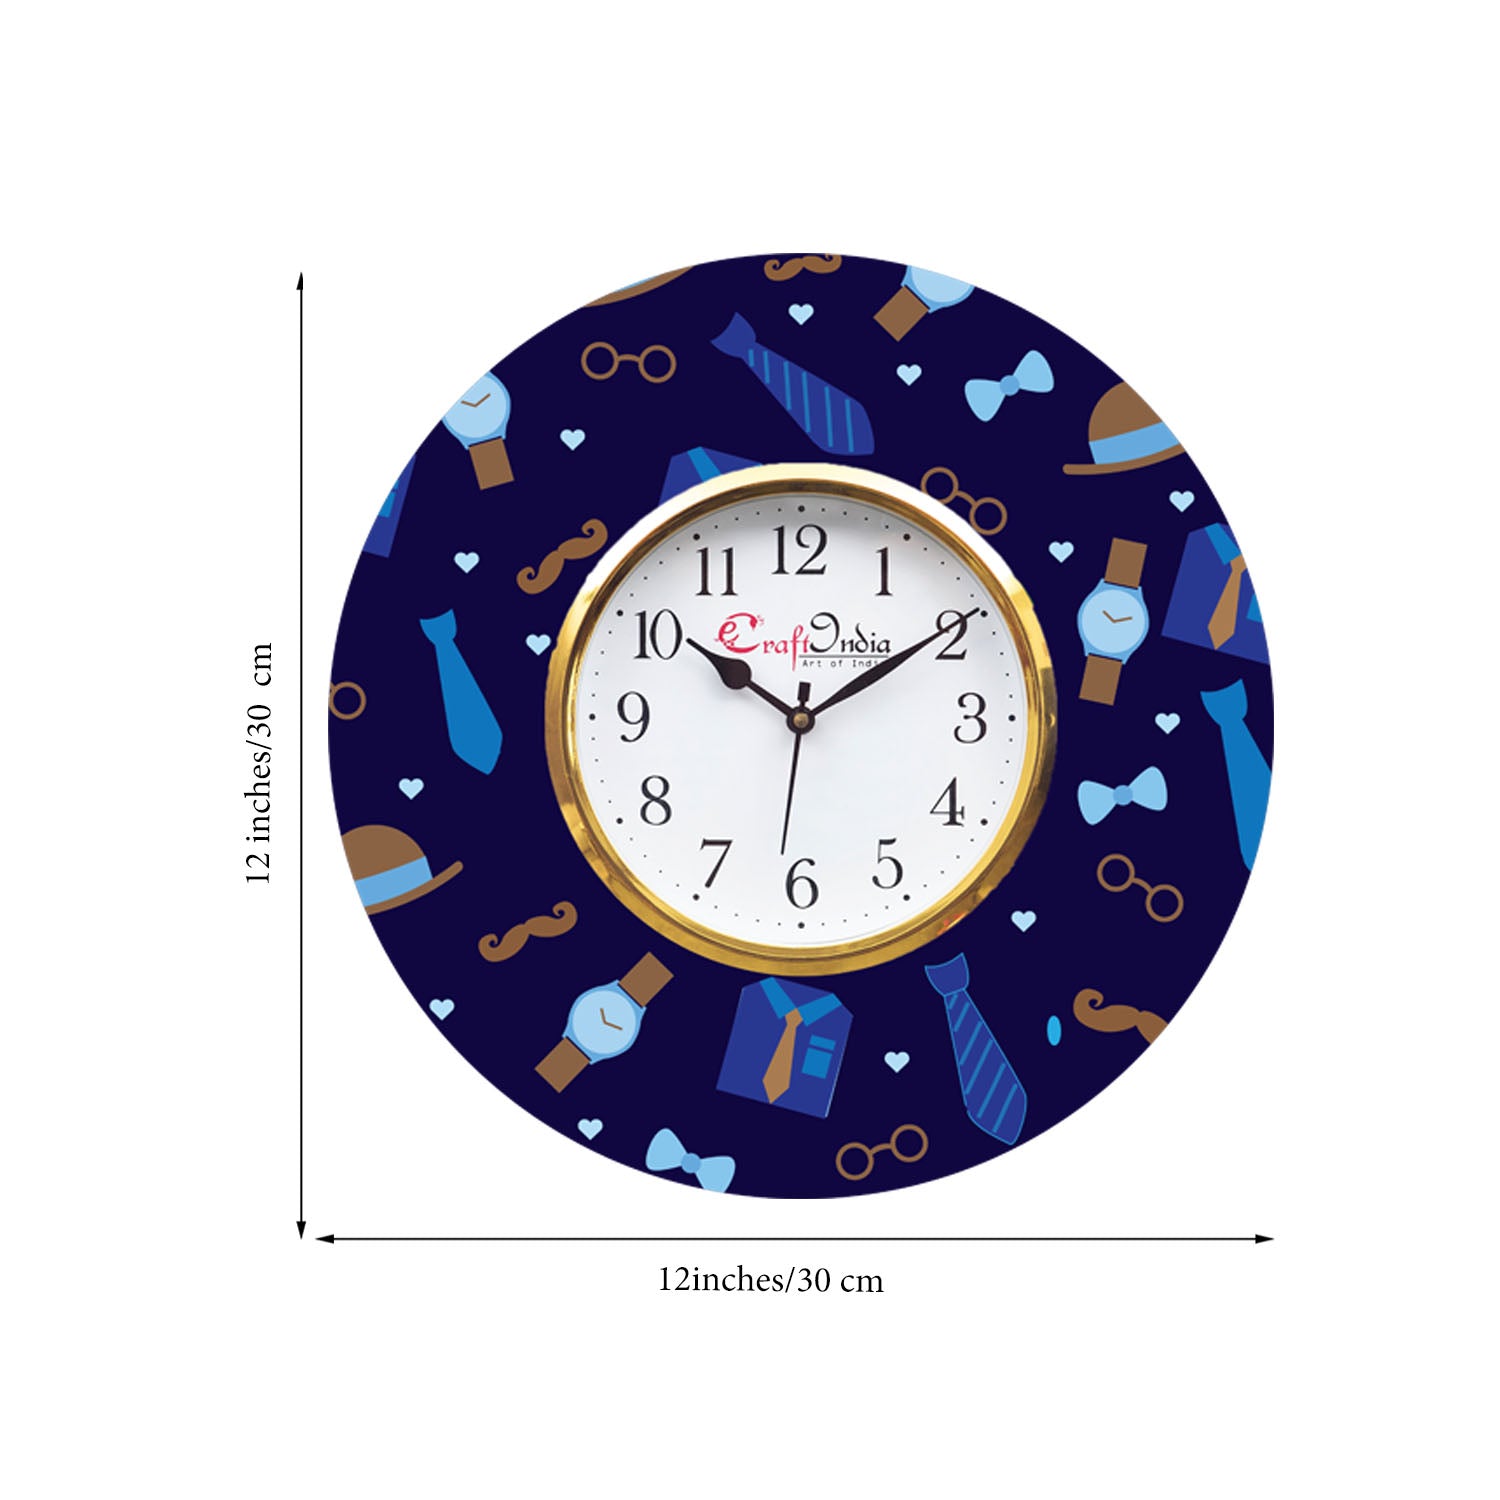 Love Gift with Tie, Specs, Watch and Moustache Theme Wooden Colorful Round Wall Clock 2